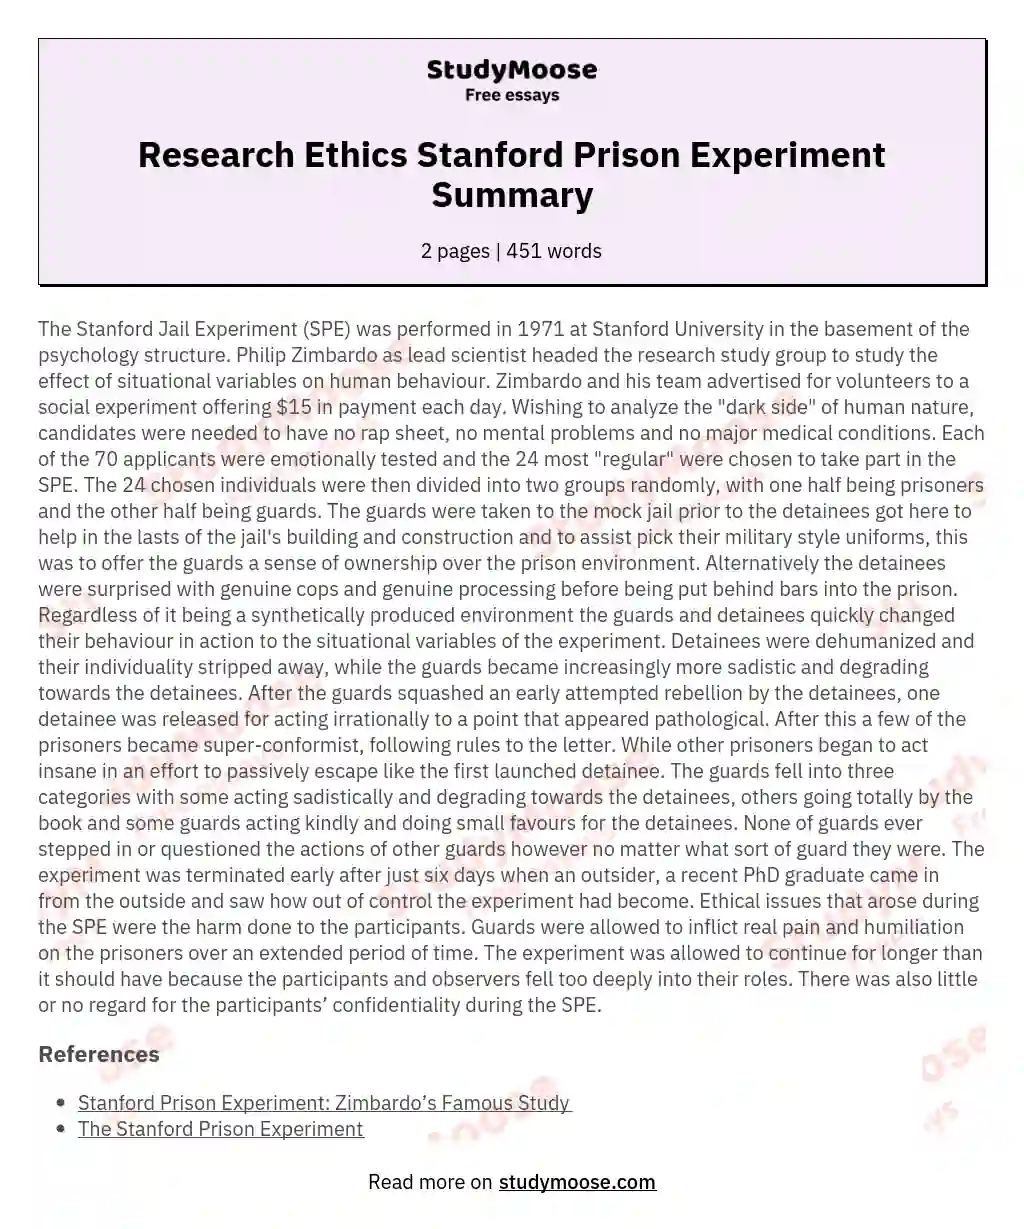 Research Ethics Stanford Prison Experiment Summary